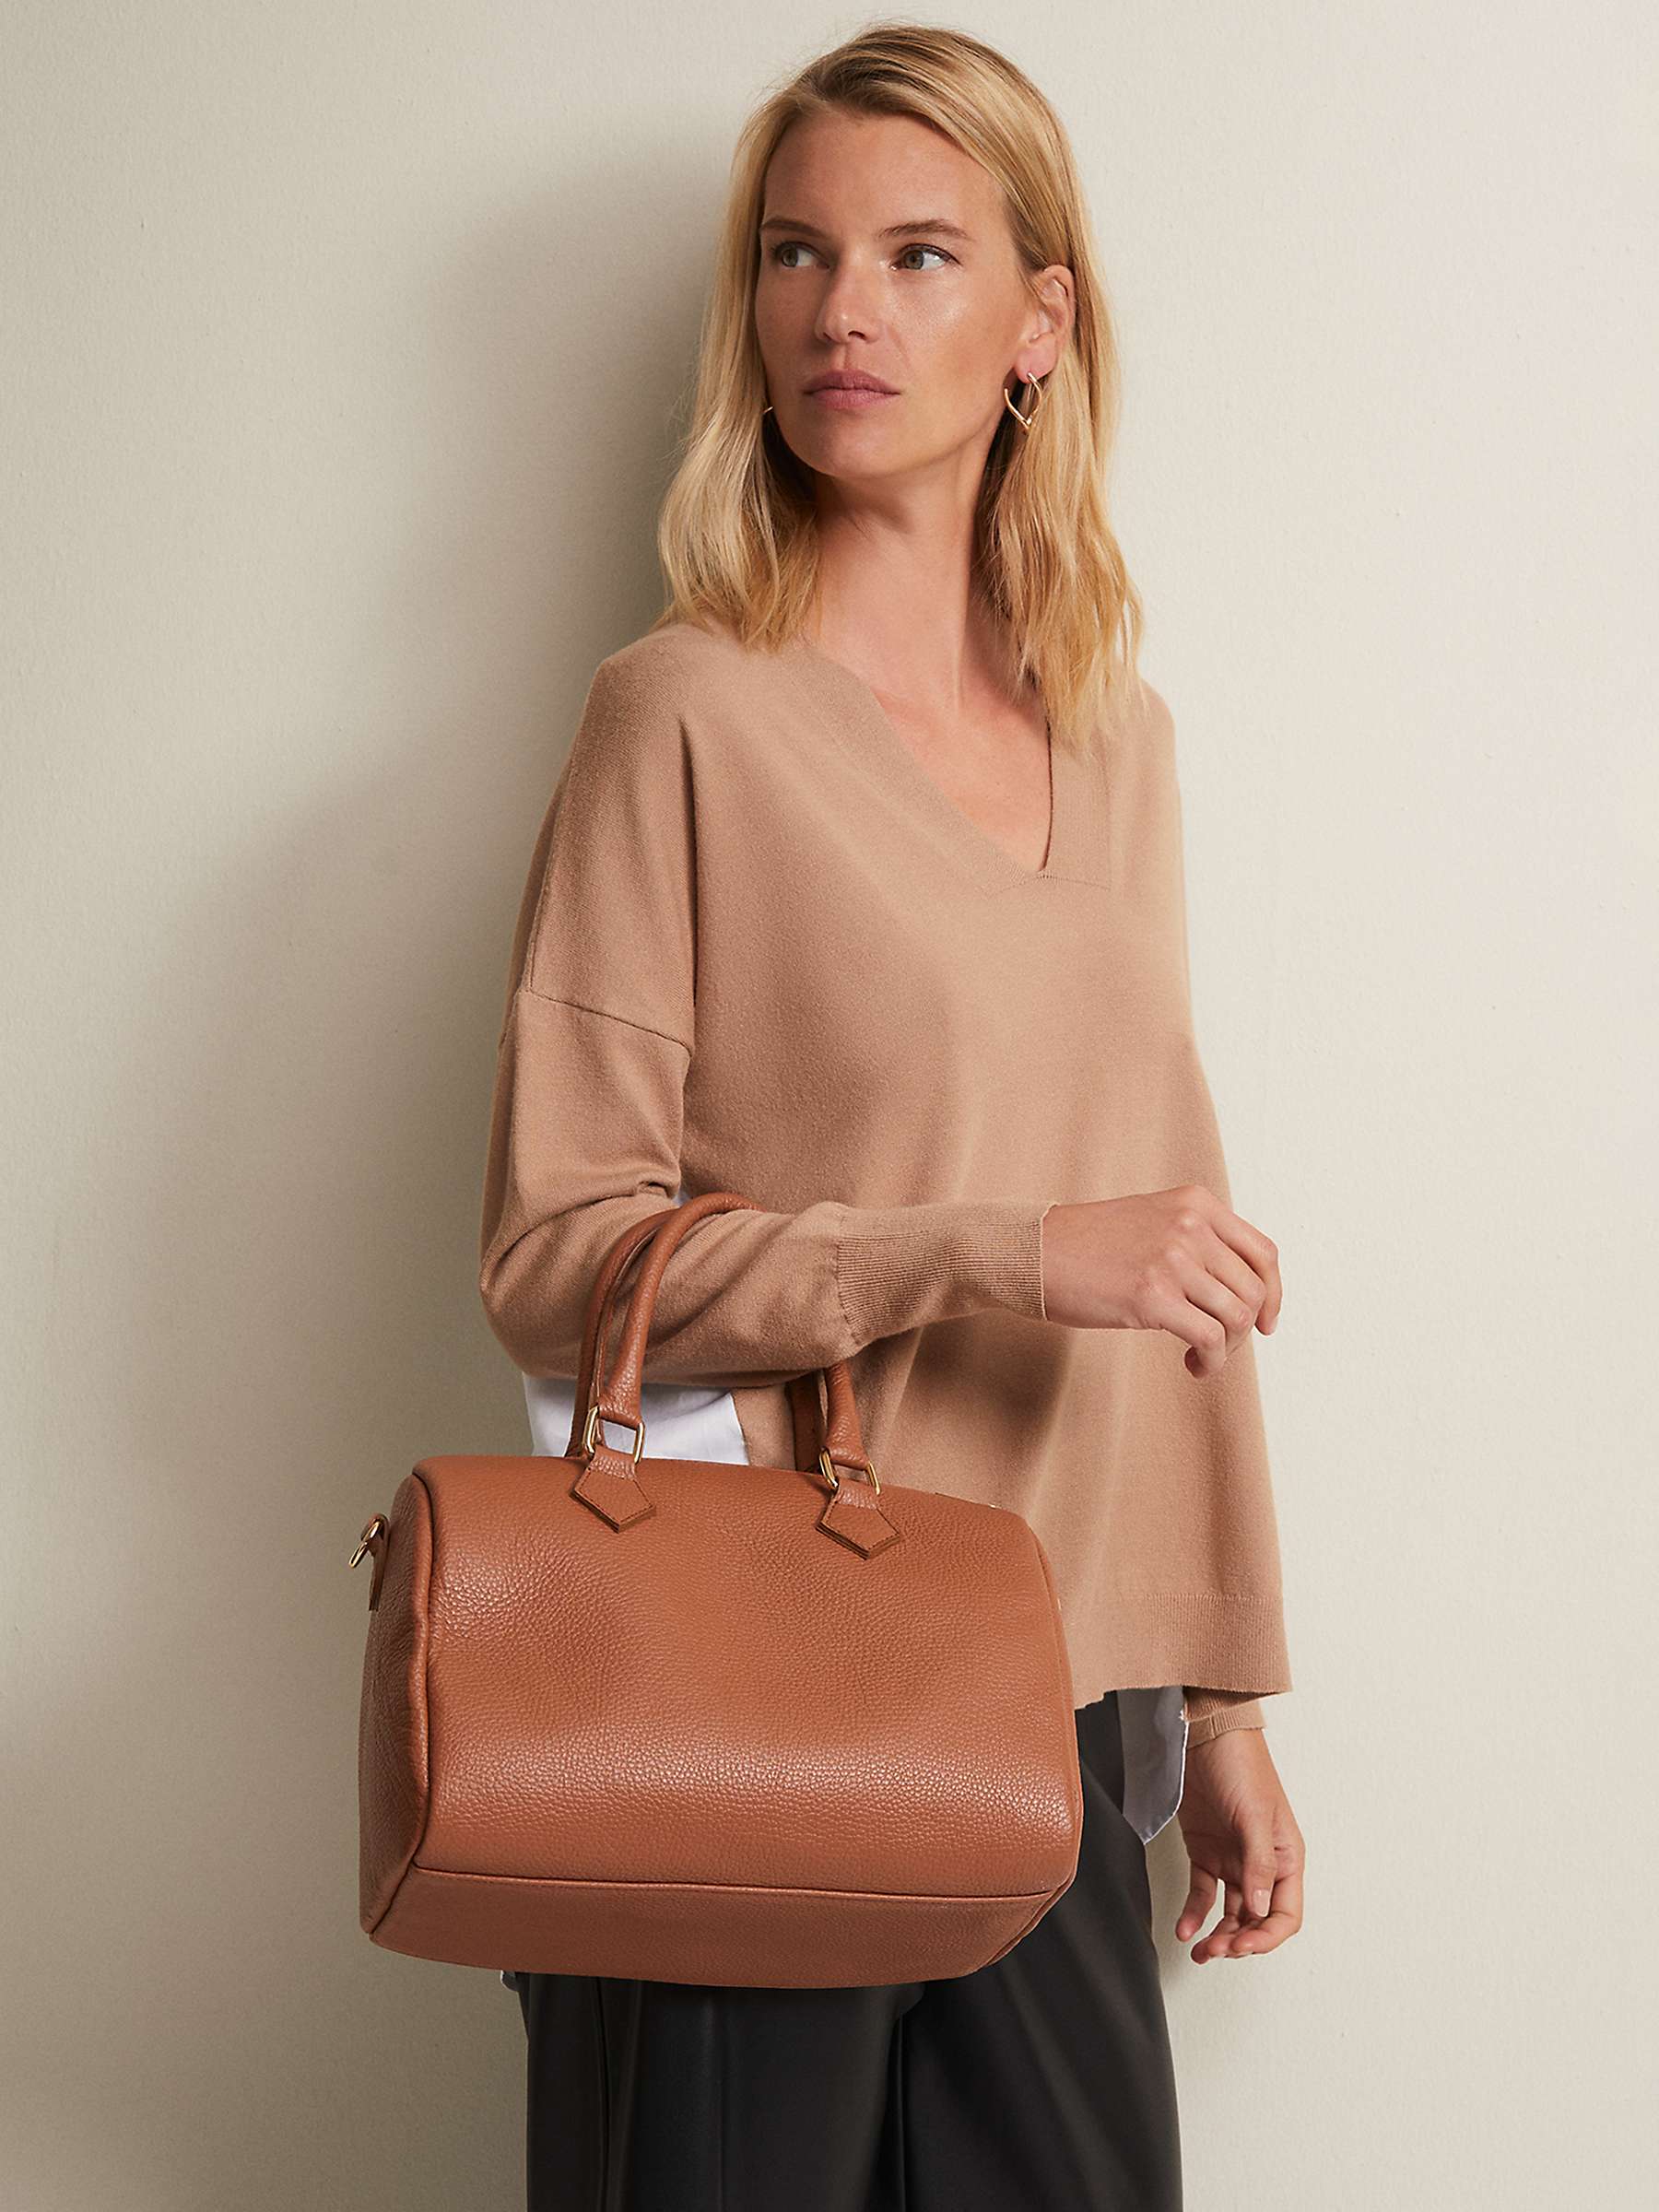 Buy Phase Eight Grained Leather Bowling Bag, Brown Online at johnlewis.com